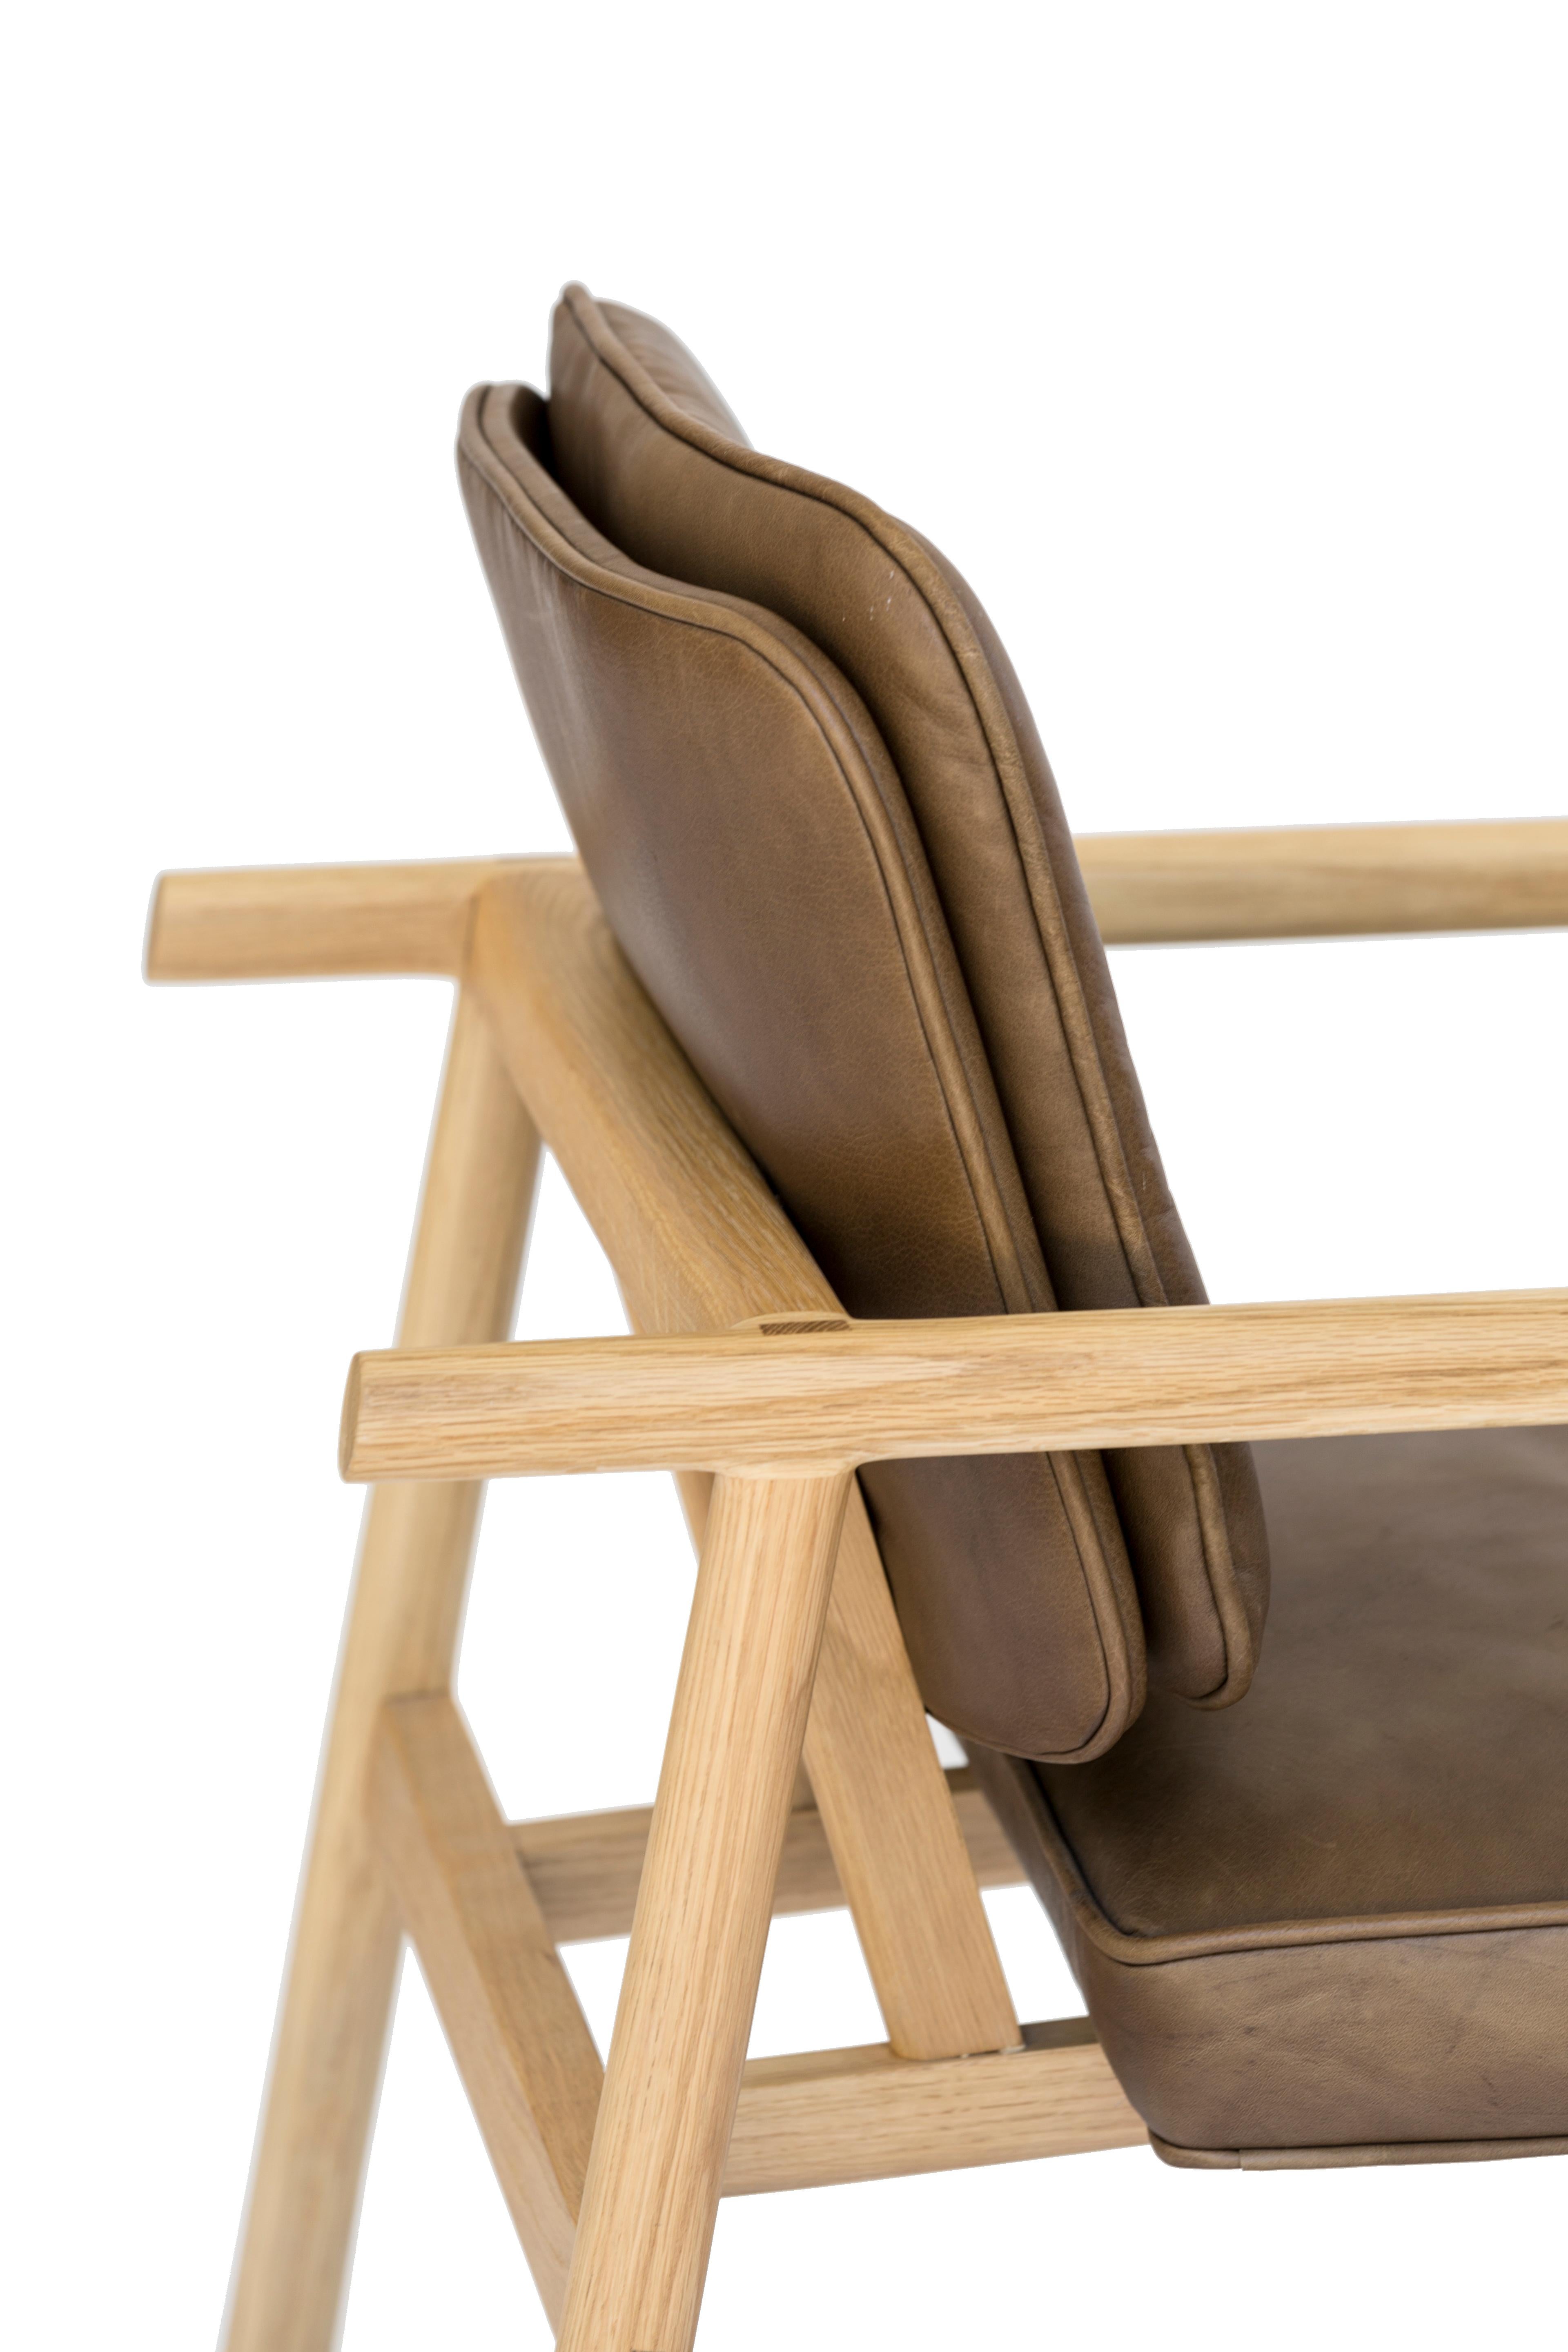 Solid wood construction with hand-cut joinery and custom upholstered seat and seat back. This chair shown in natural oak and olive leather.

In stock leather choice: black, olive, camel or vegtan leather.
Wood choice: ebonized oak, walnut, natural